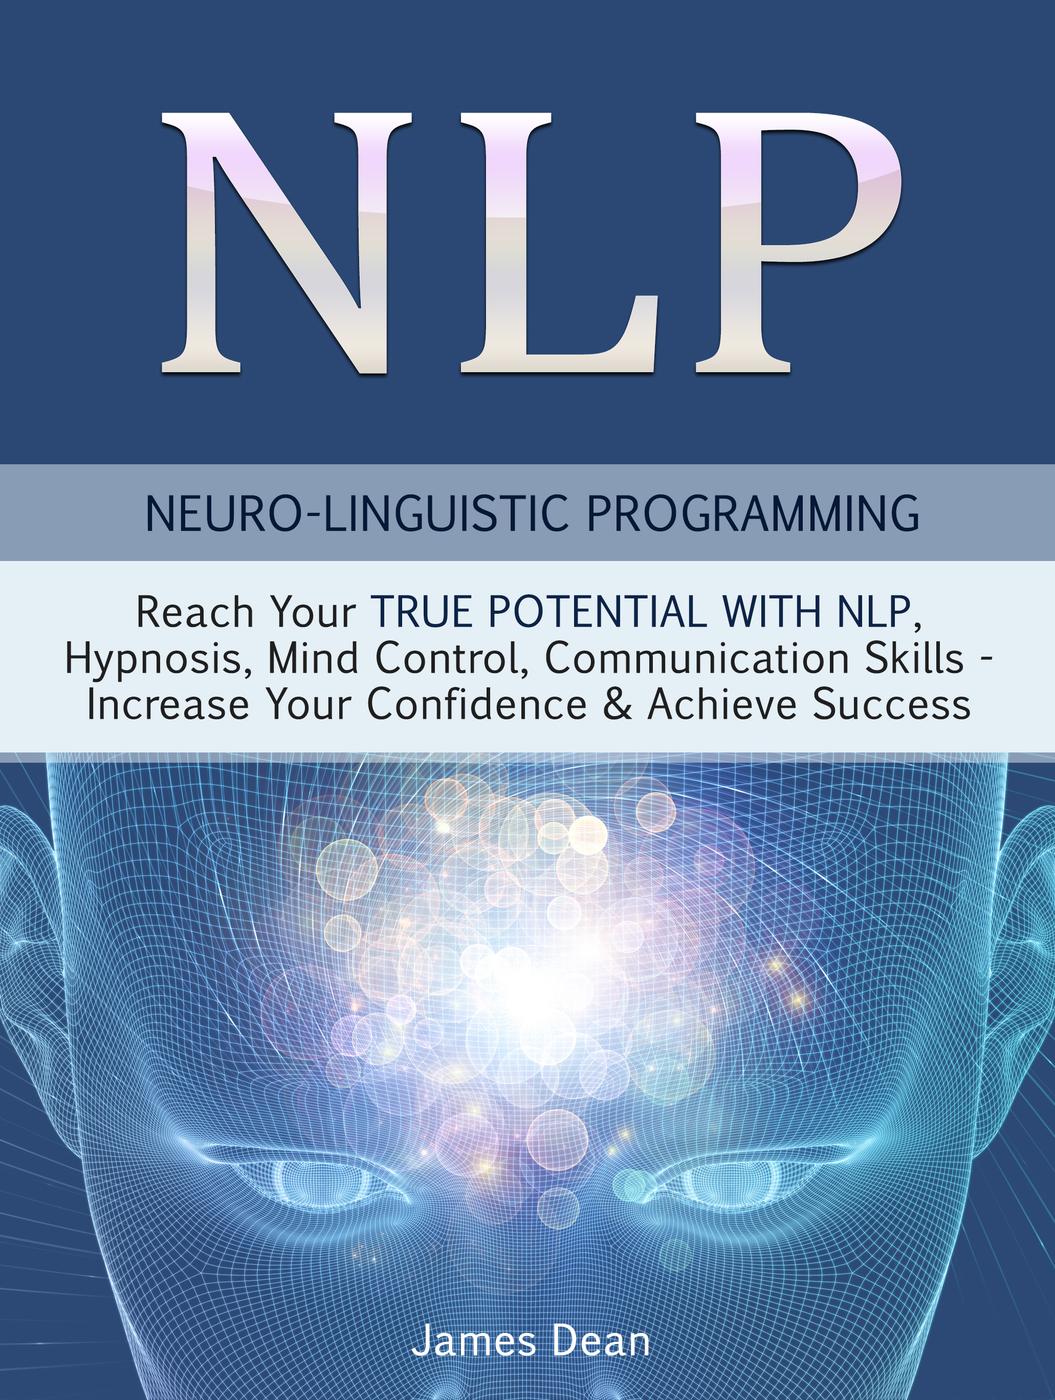 nlp and hypnosis books torrent